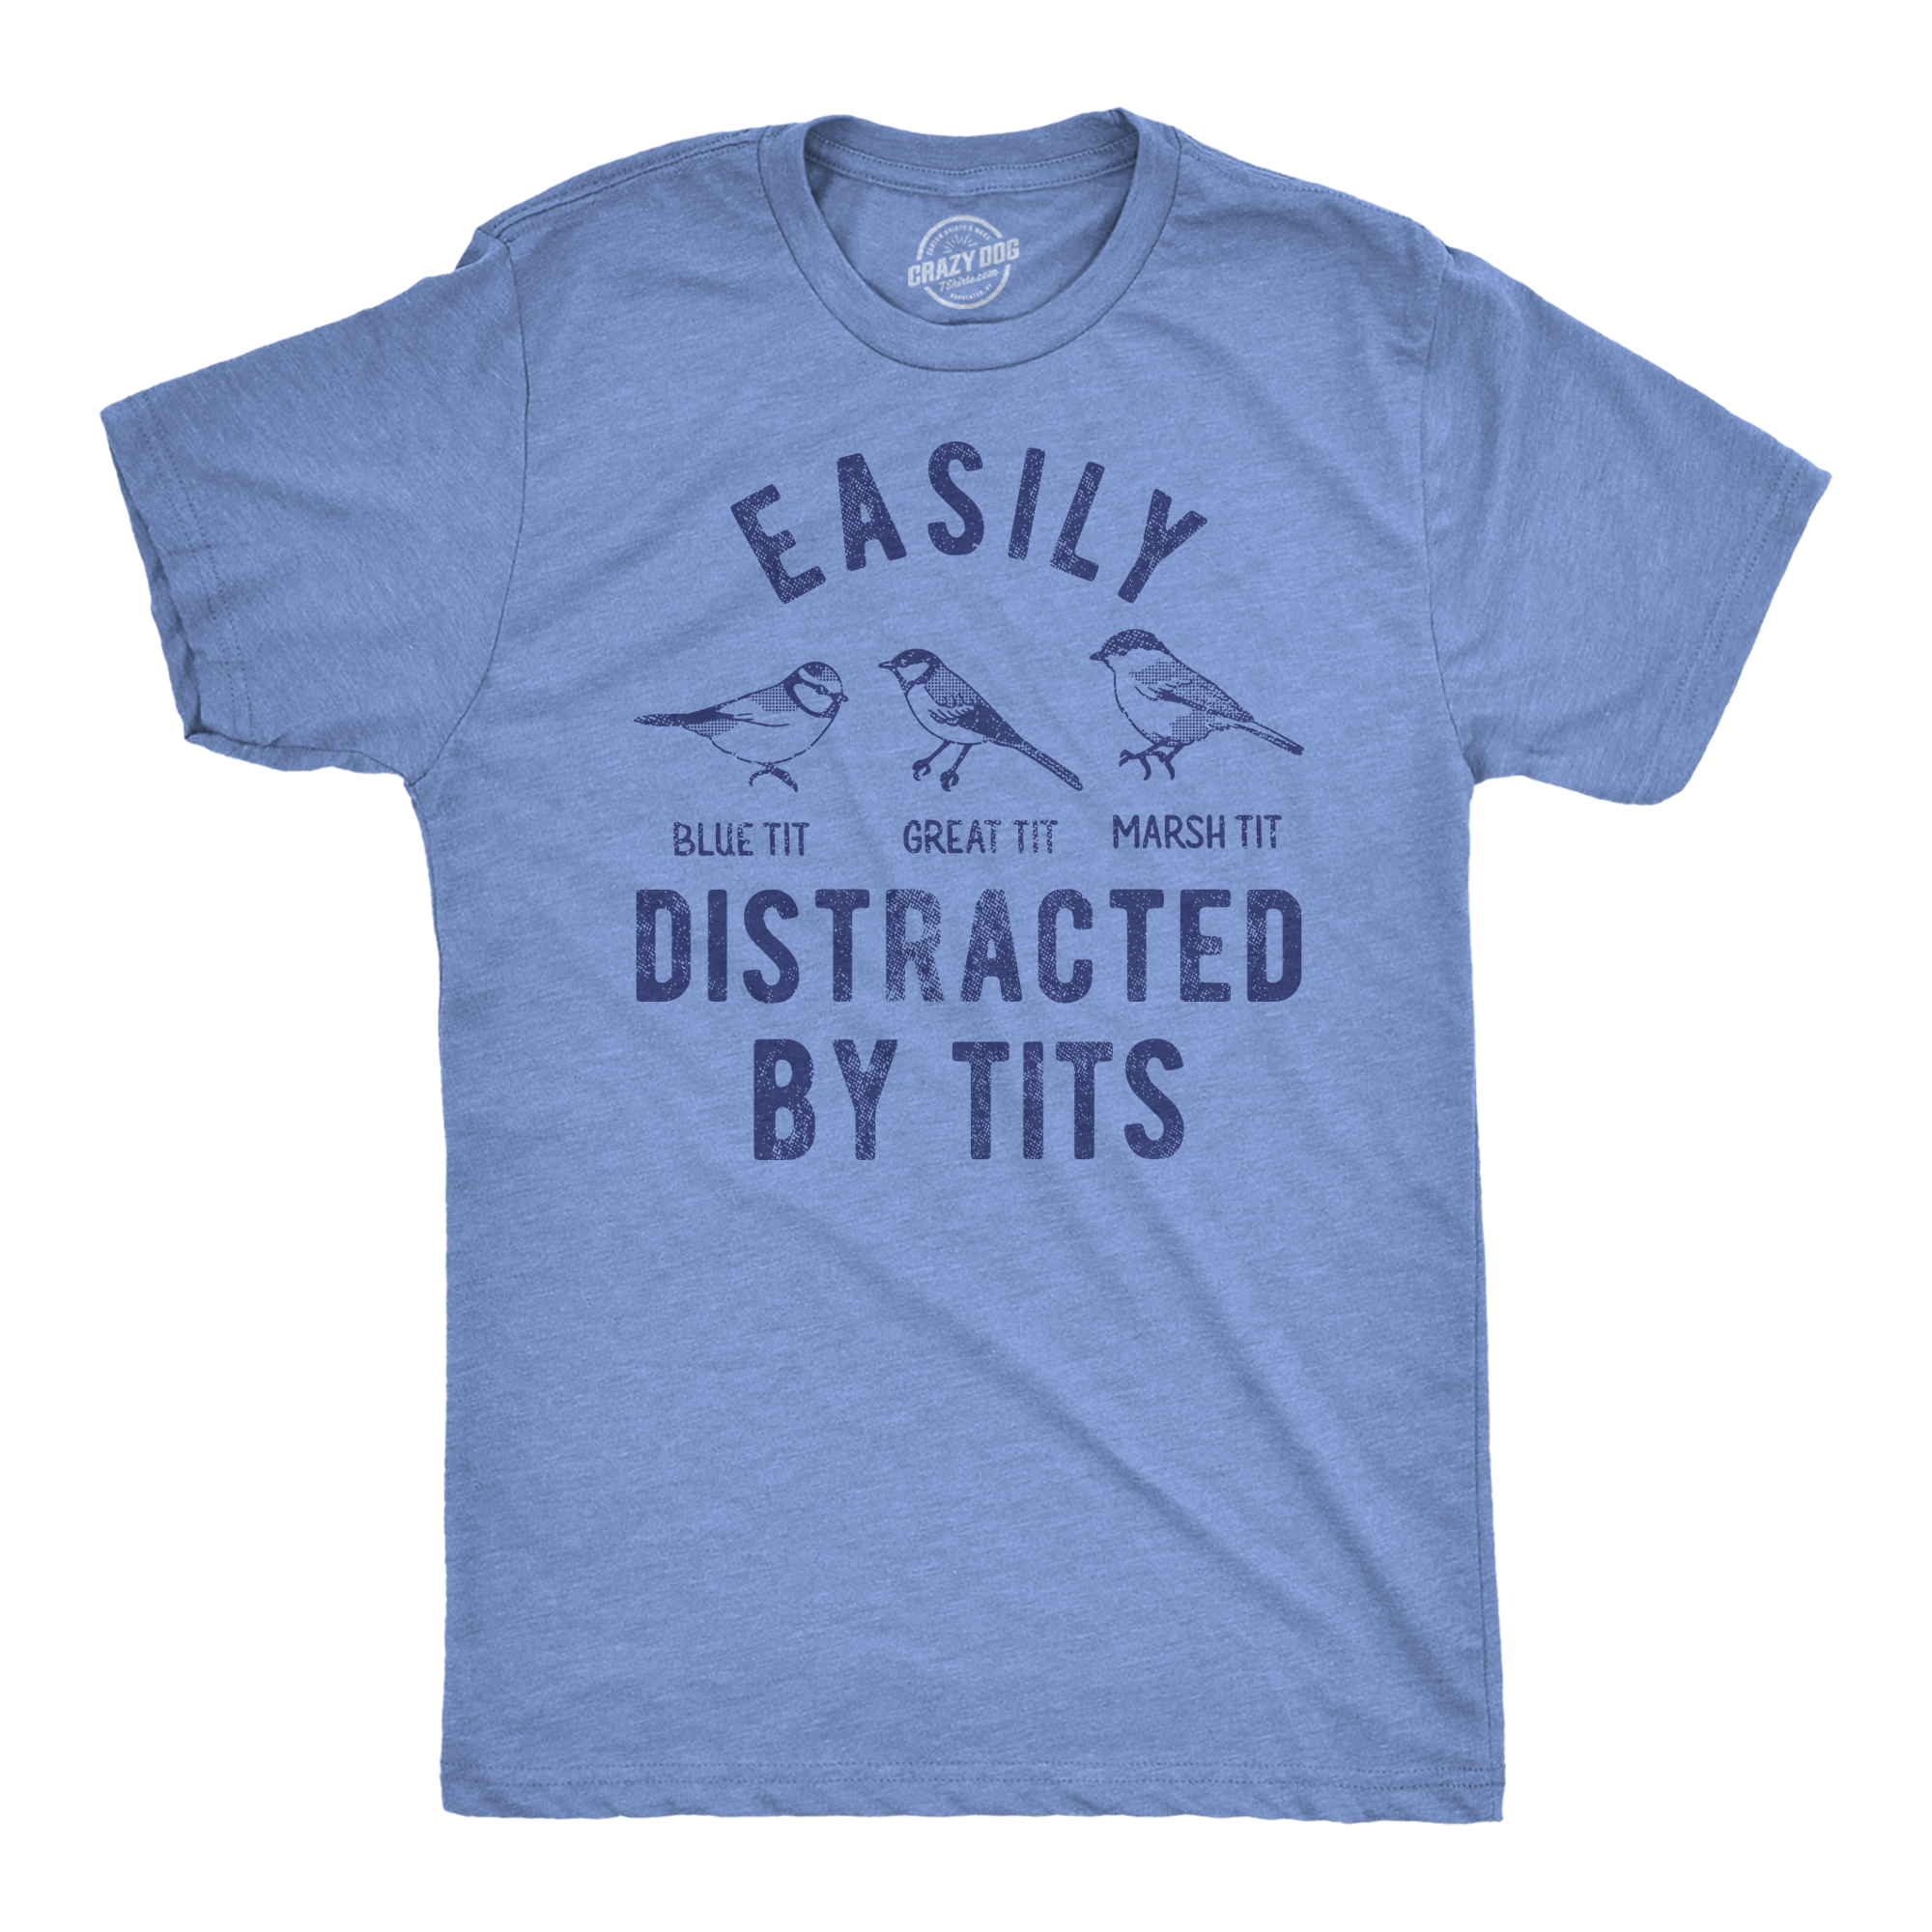 Funny Light Heather Blue - Distracted By Tits Easily Distracted By Tits Mens T Shirt Nerdy sarcastic Tee